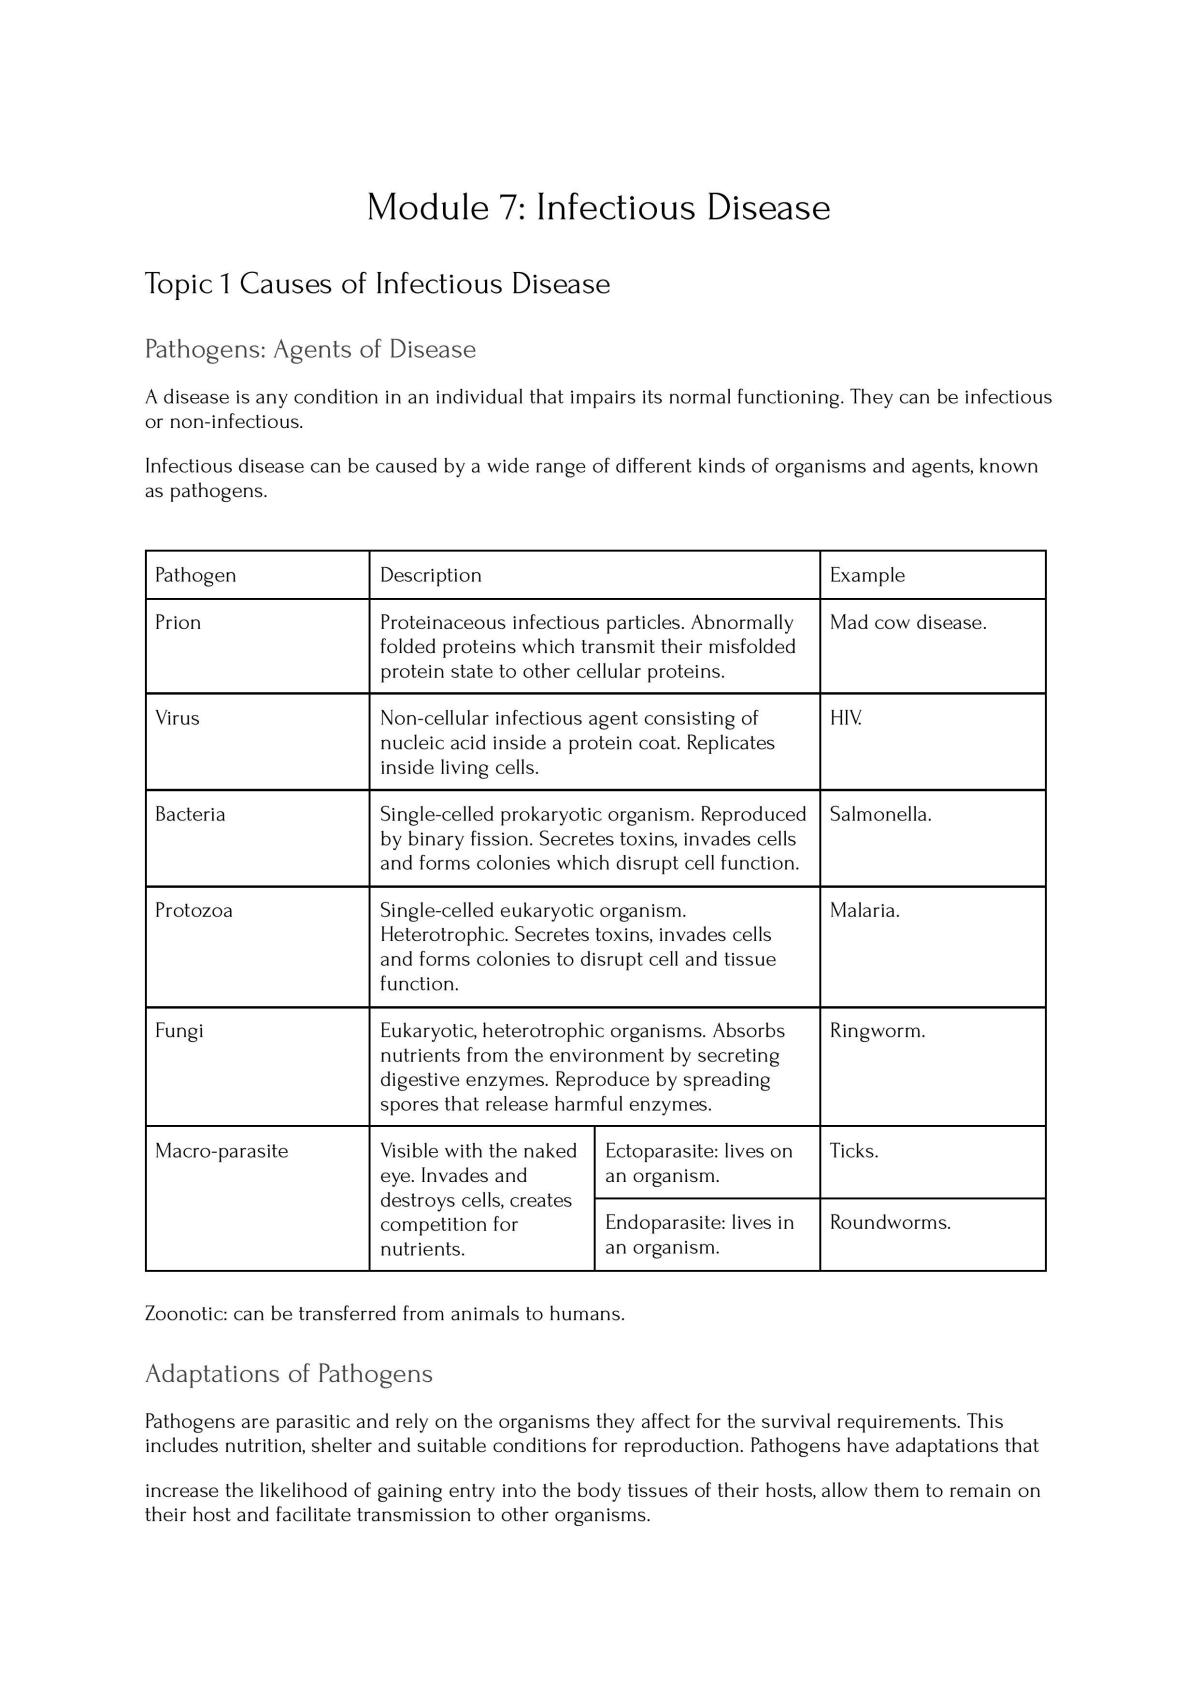 Module 7: Infectious Disease - Page 1